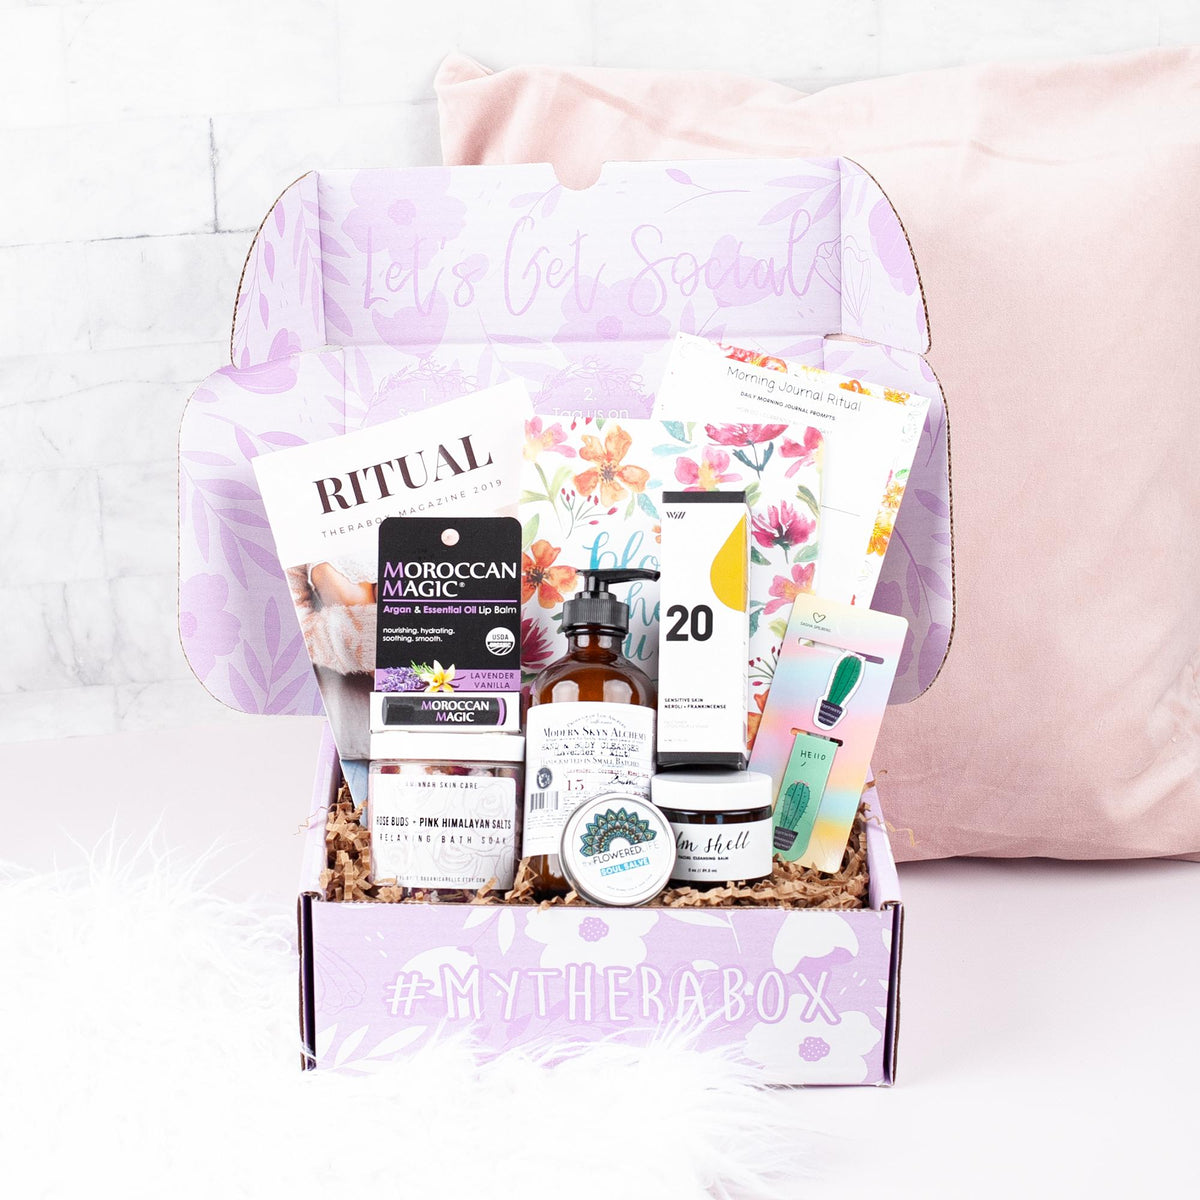 Cheap self-care subscription boxes